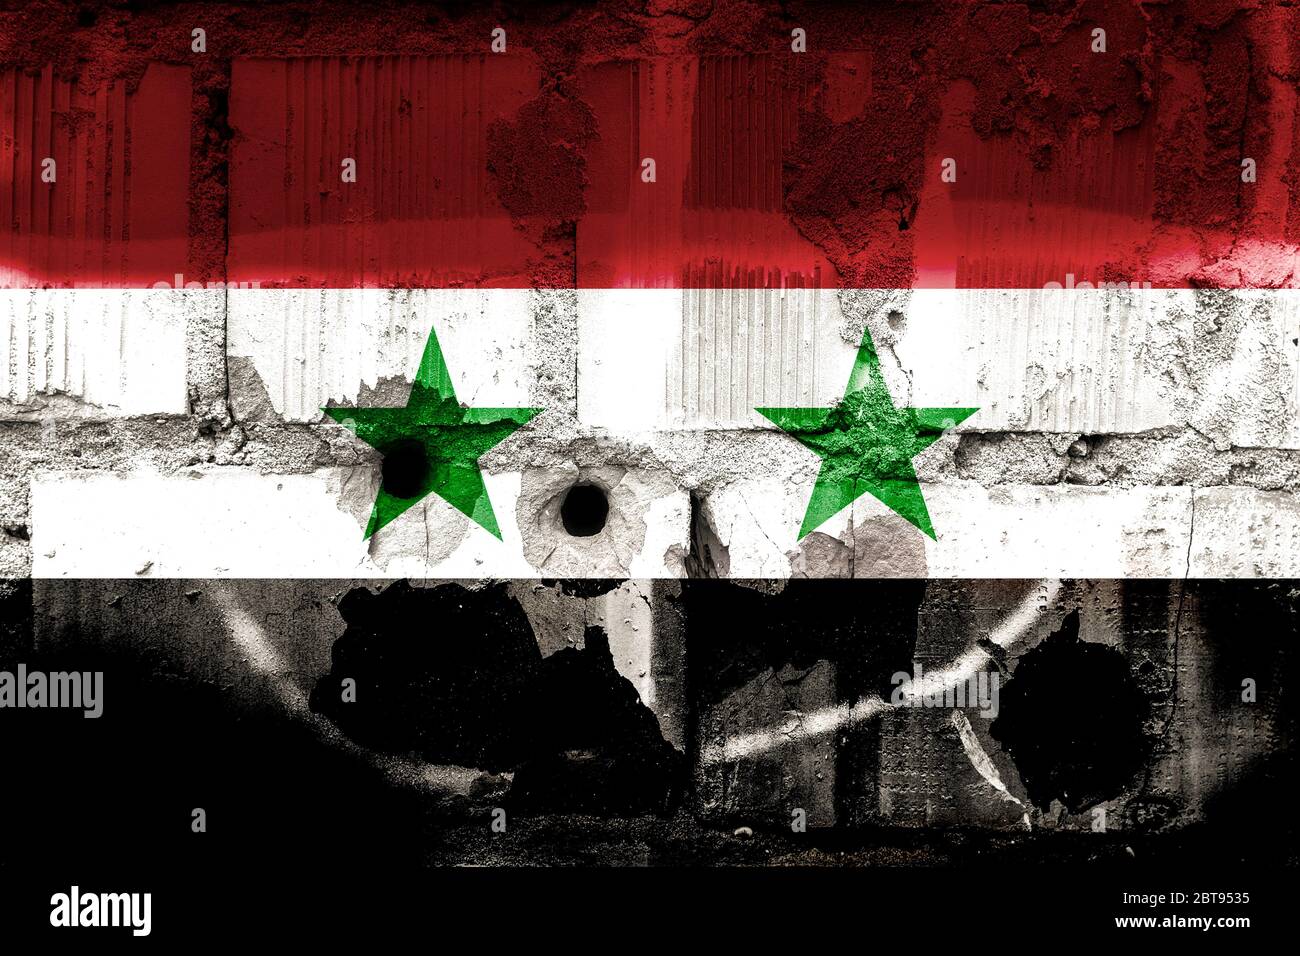 Flag of Syria, History, Design, Colors